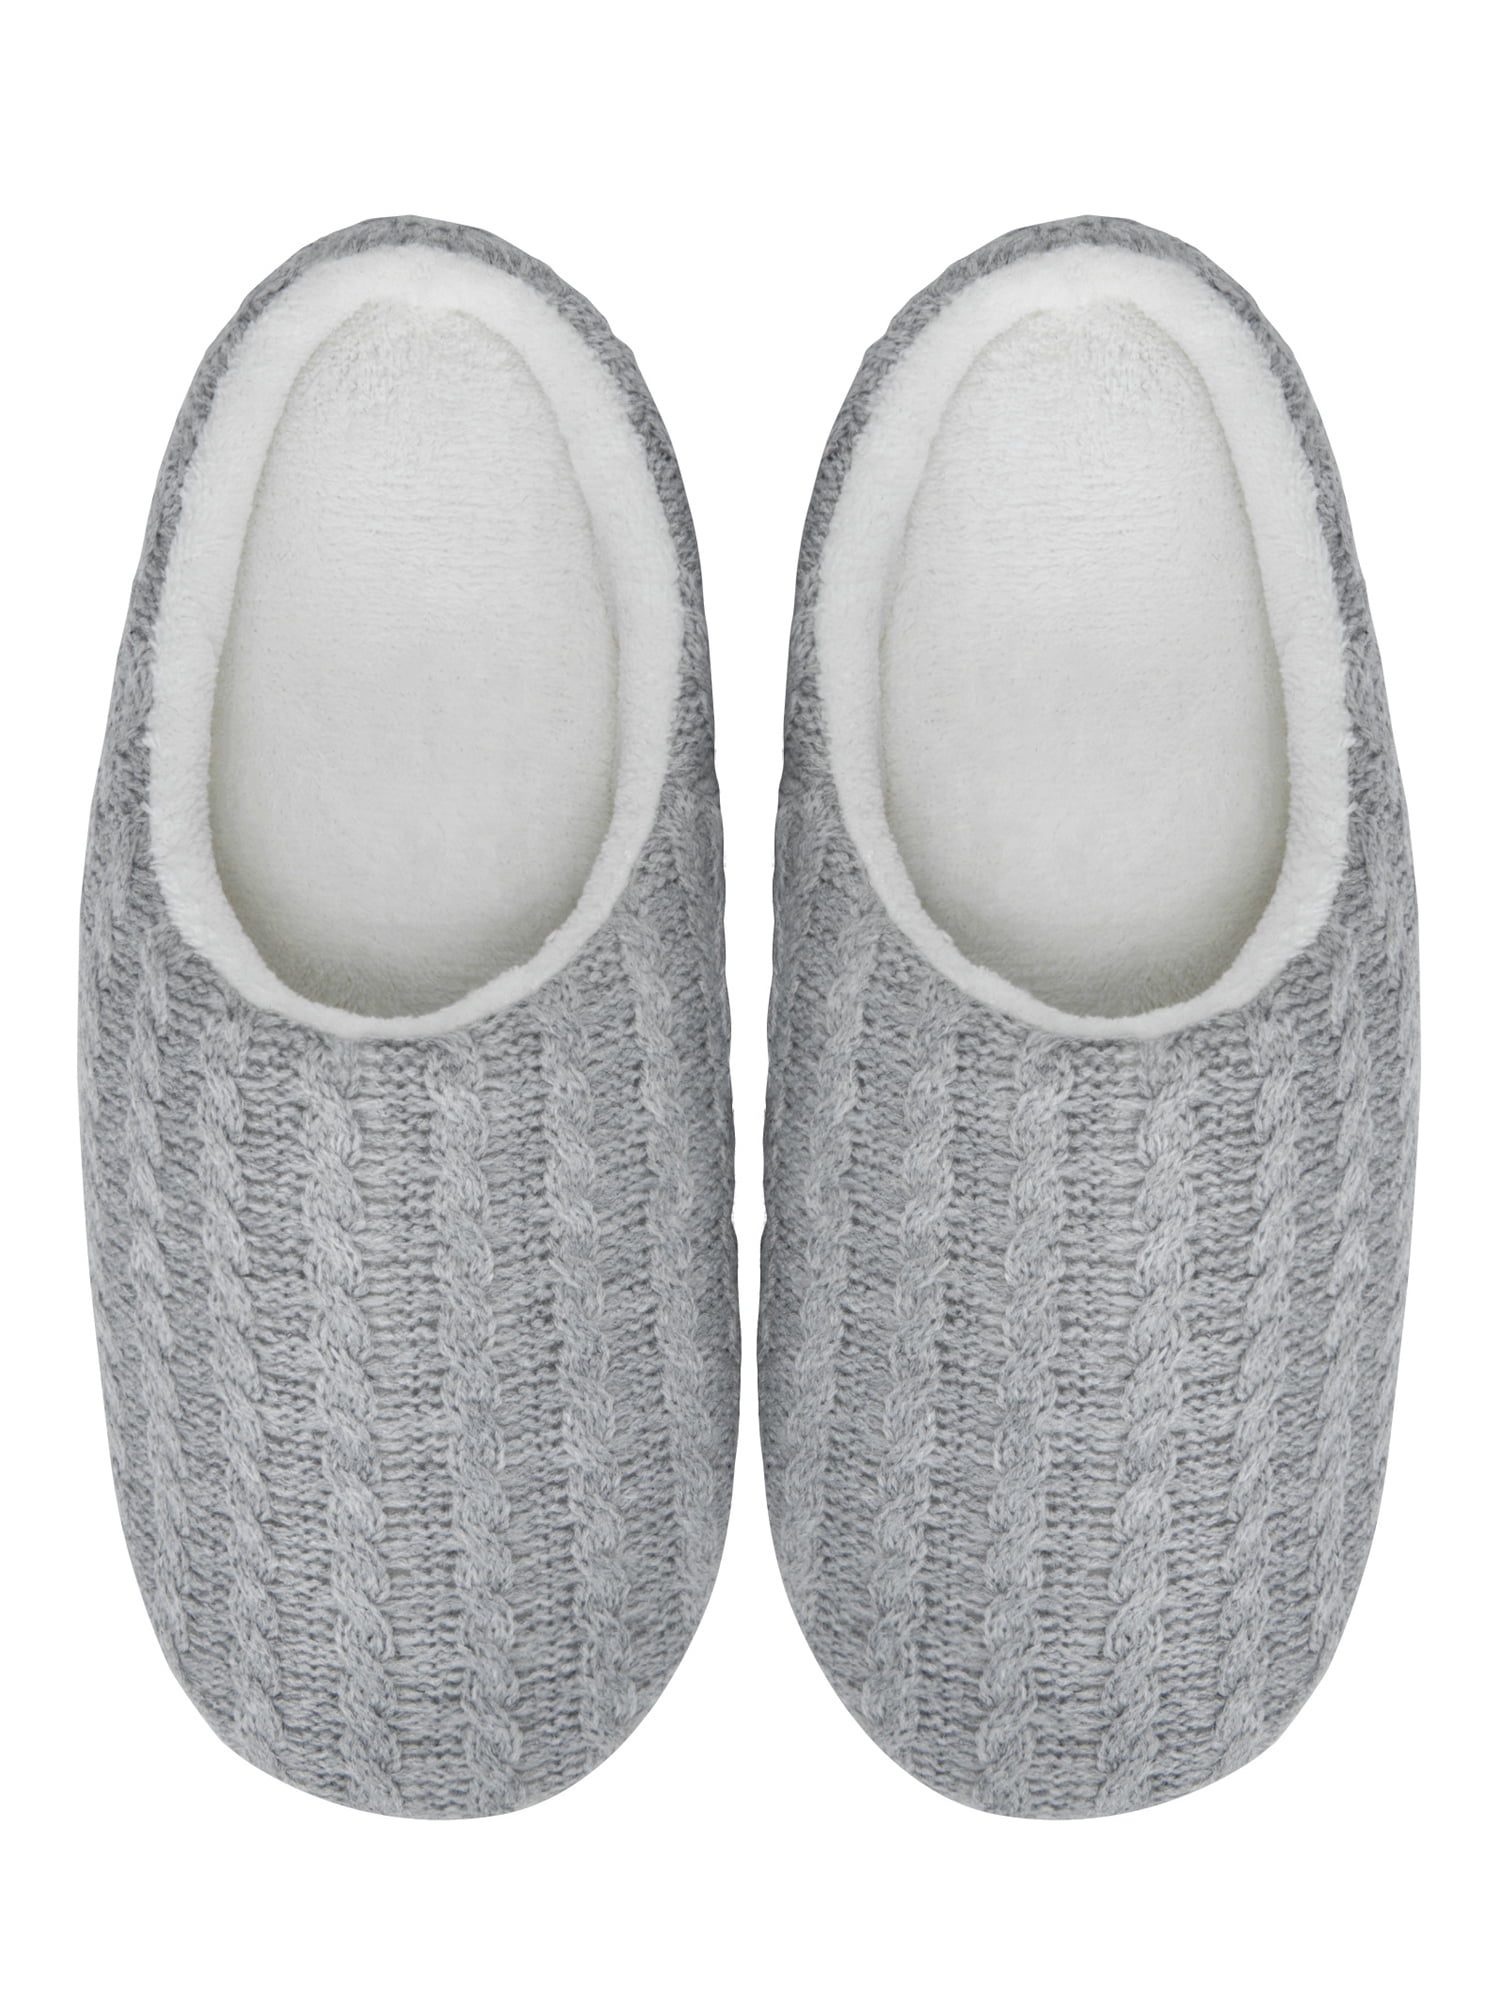 cool bedroom slippers